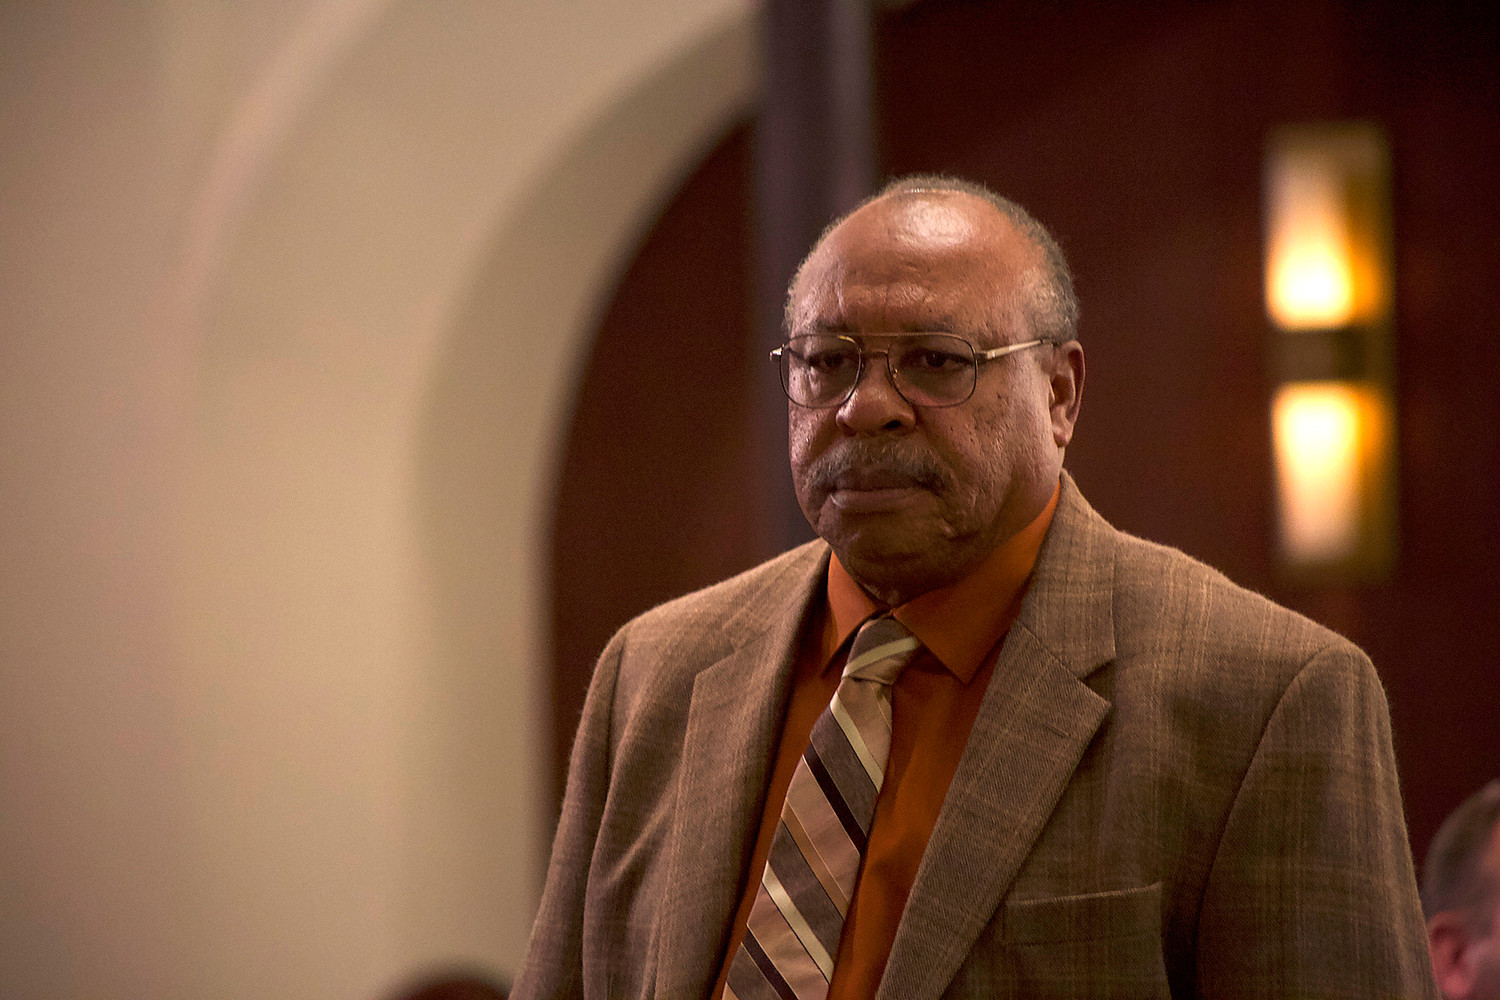 Earl Billings stars in a scene from the movie “Gosnell: The Trial of America’s Biggest Serial Killer.” The Catholic News Service classification is A-III — adults. The Motion Picture Association of America rating is PG-13 — parents strongly cautioned. Some material may be inappropriate for children under 13.